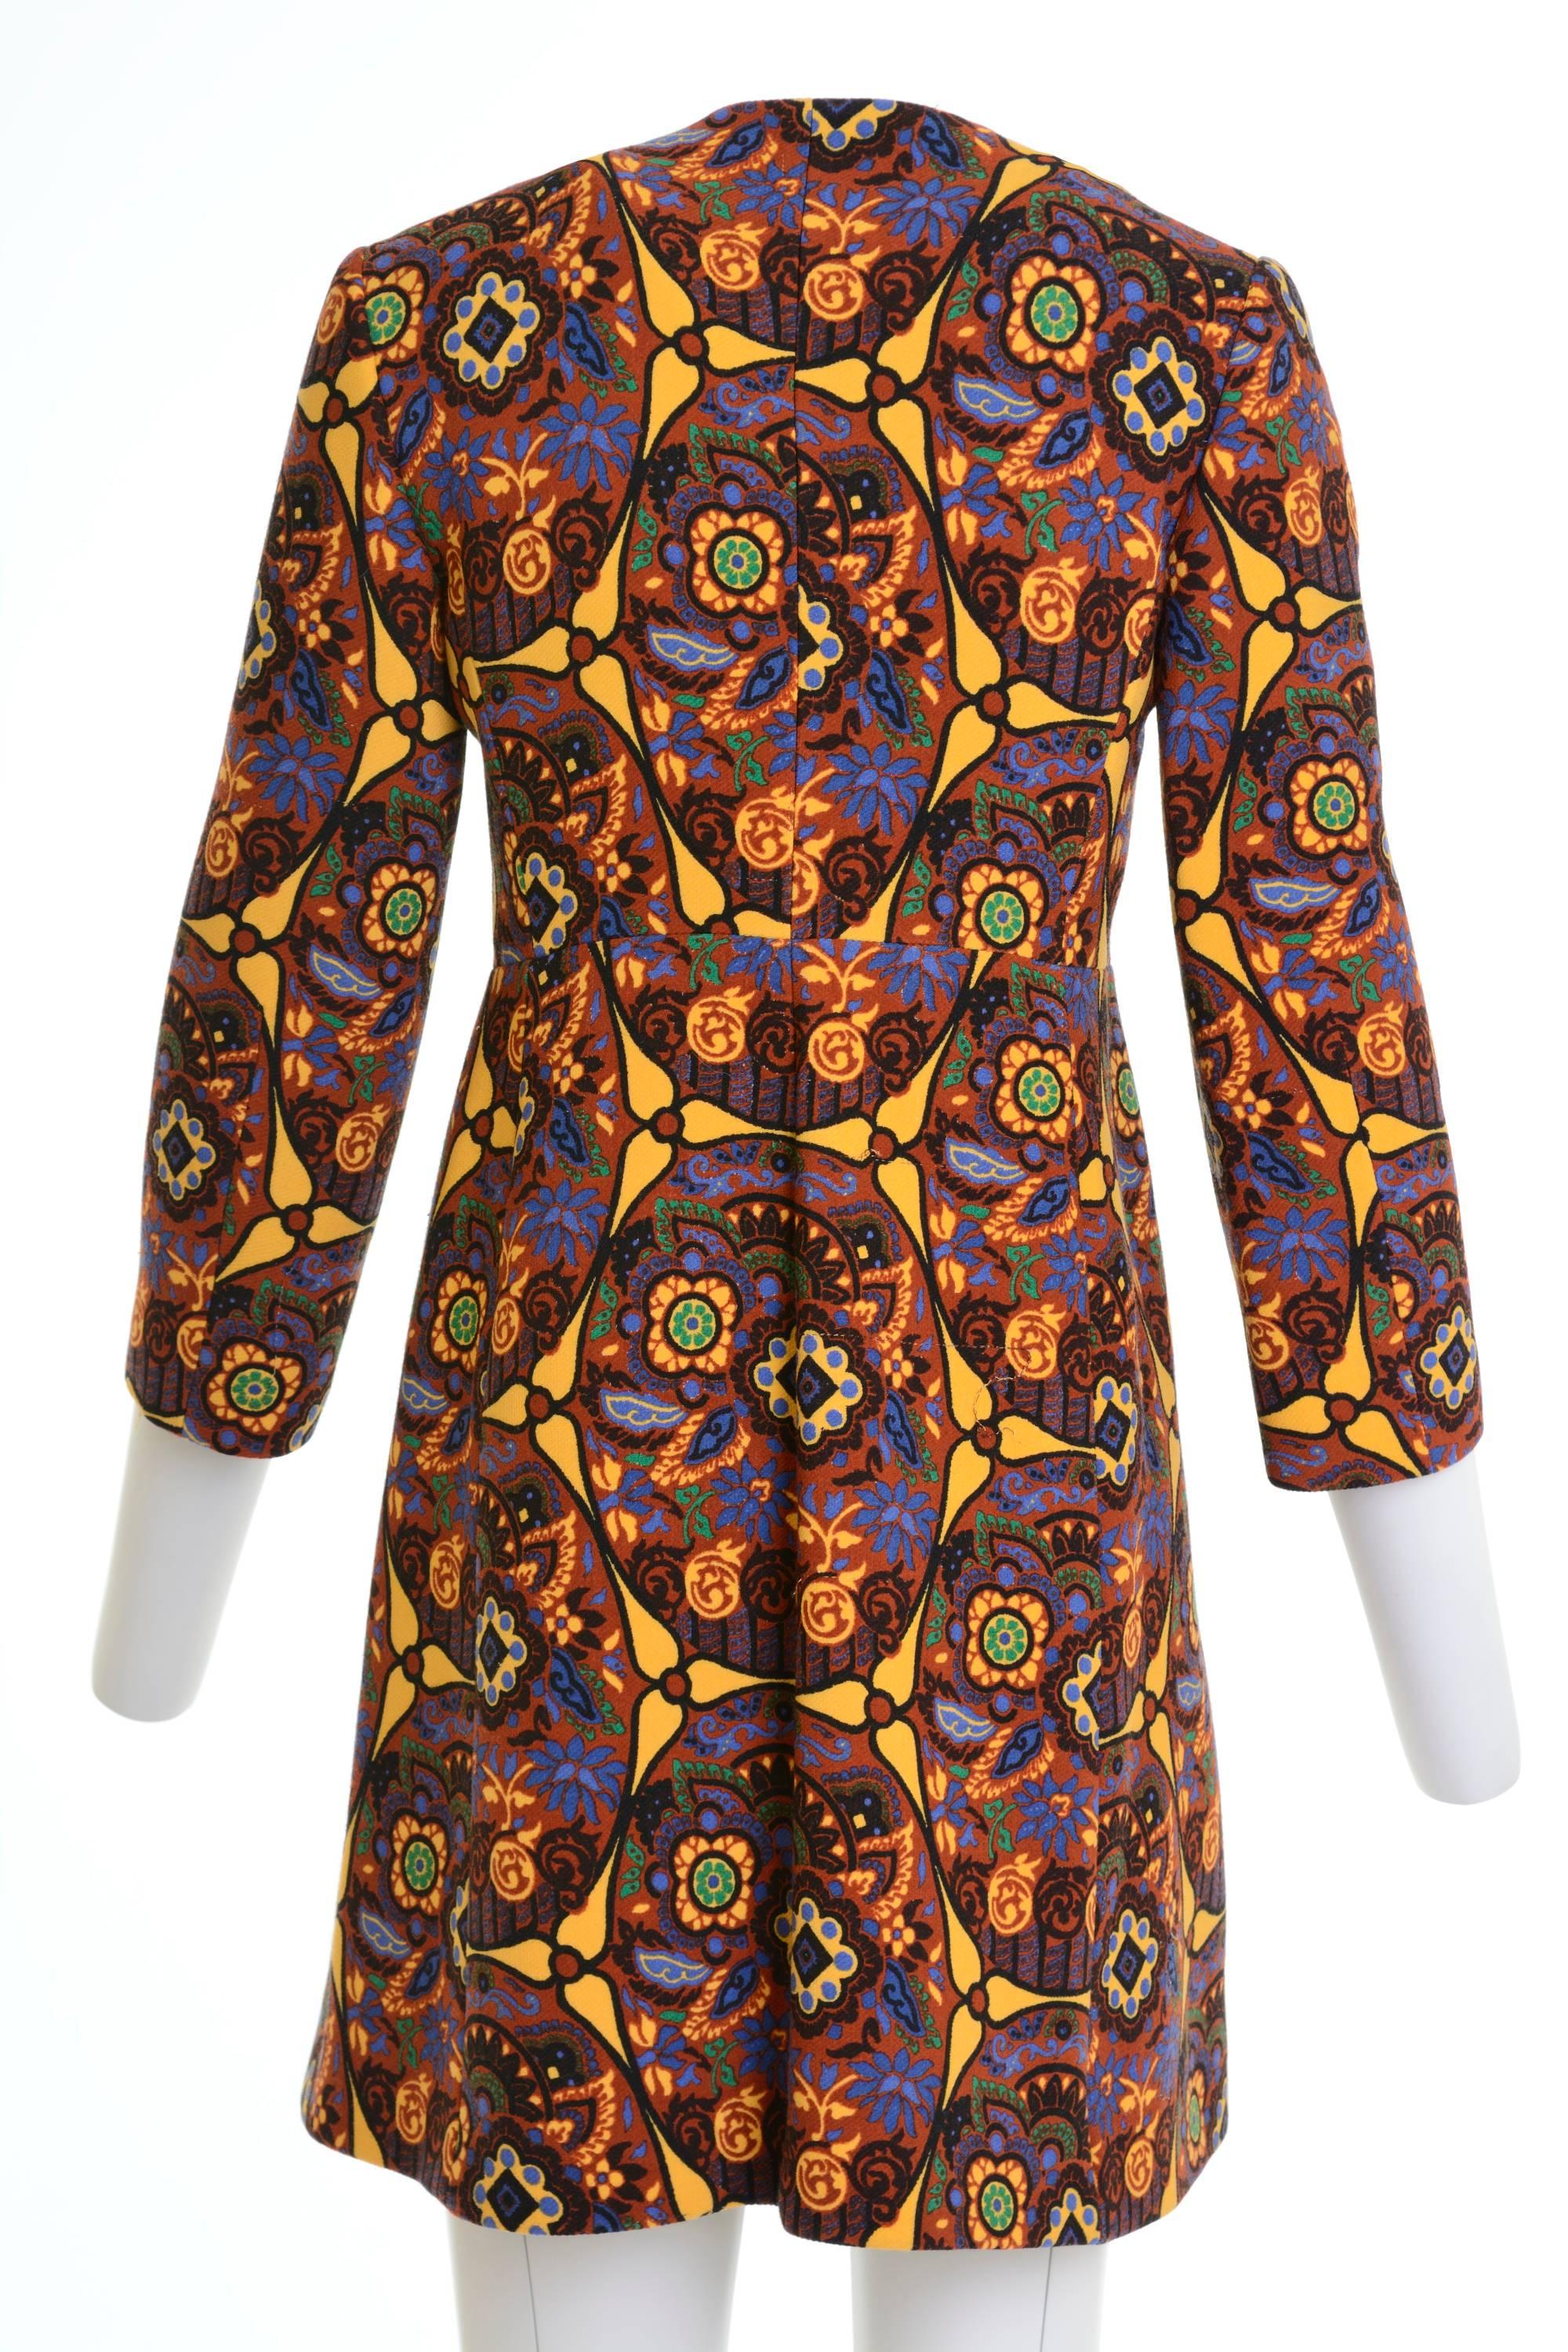 Prada coat in a arabesque printed textile, stretch fabric, seam pockets, asymmetrical collar closure, snaps, fully lined.

Good Condition (wires pulled)

Fabric: Rayon/Acetate/Wool
Colour: brown/ yellow/ blu/ black/ green

Measurements:
Estimated